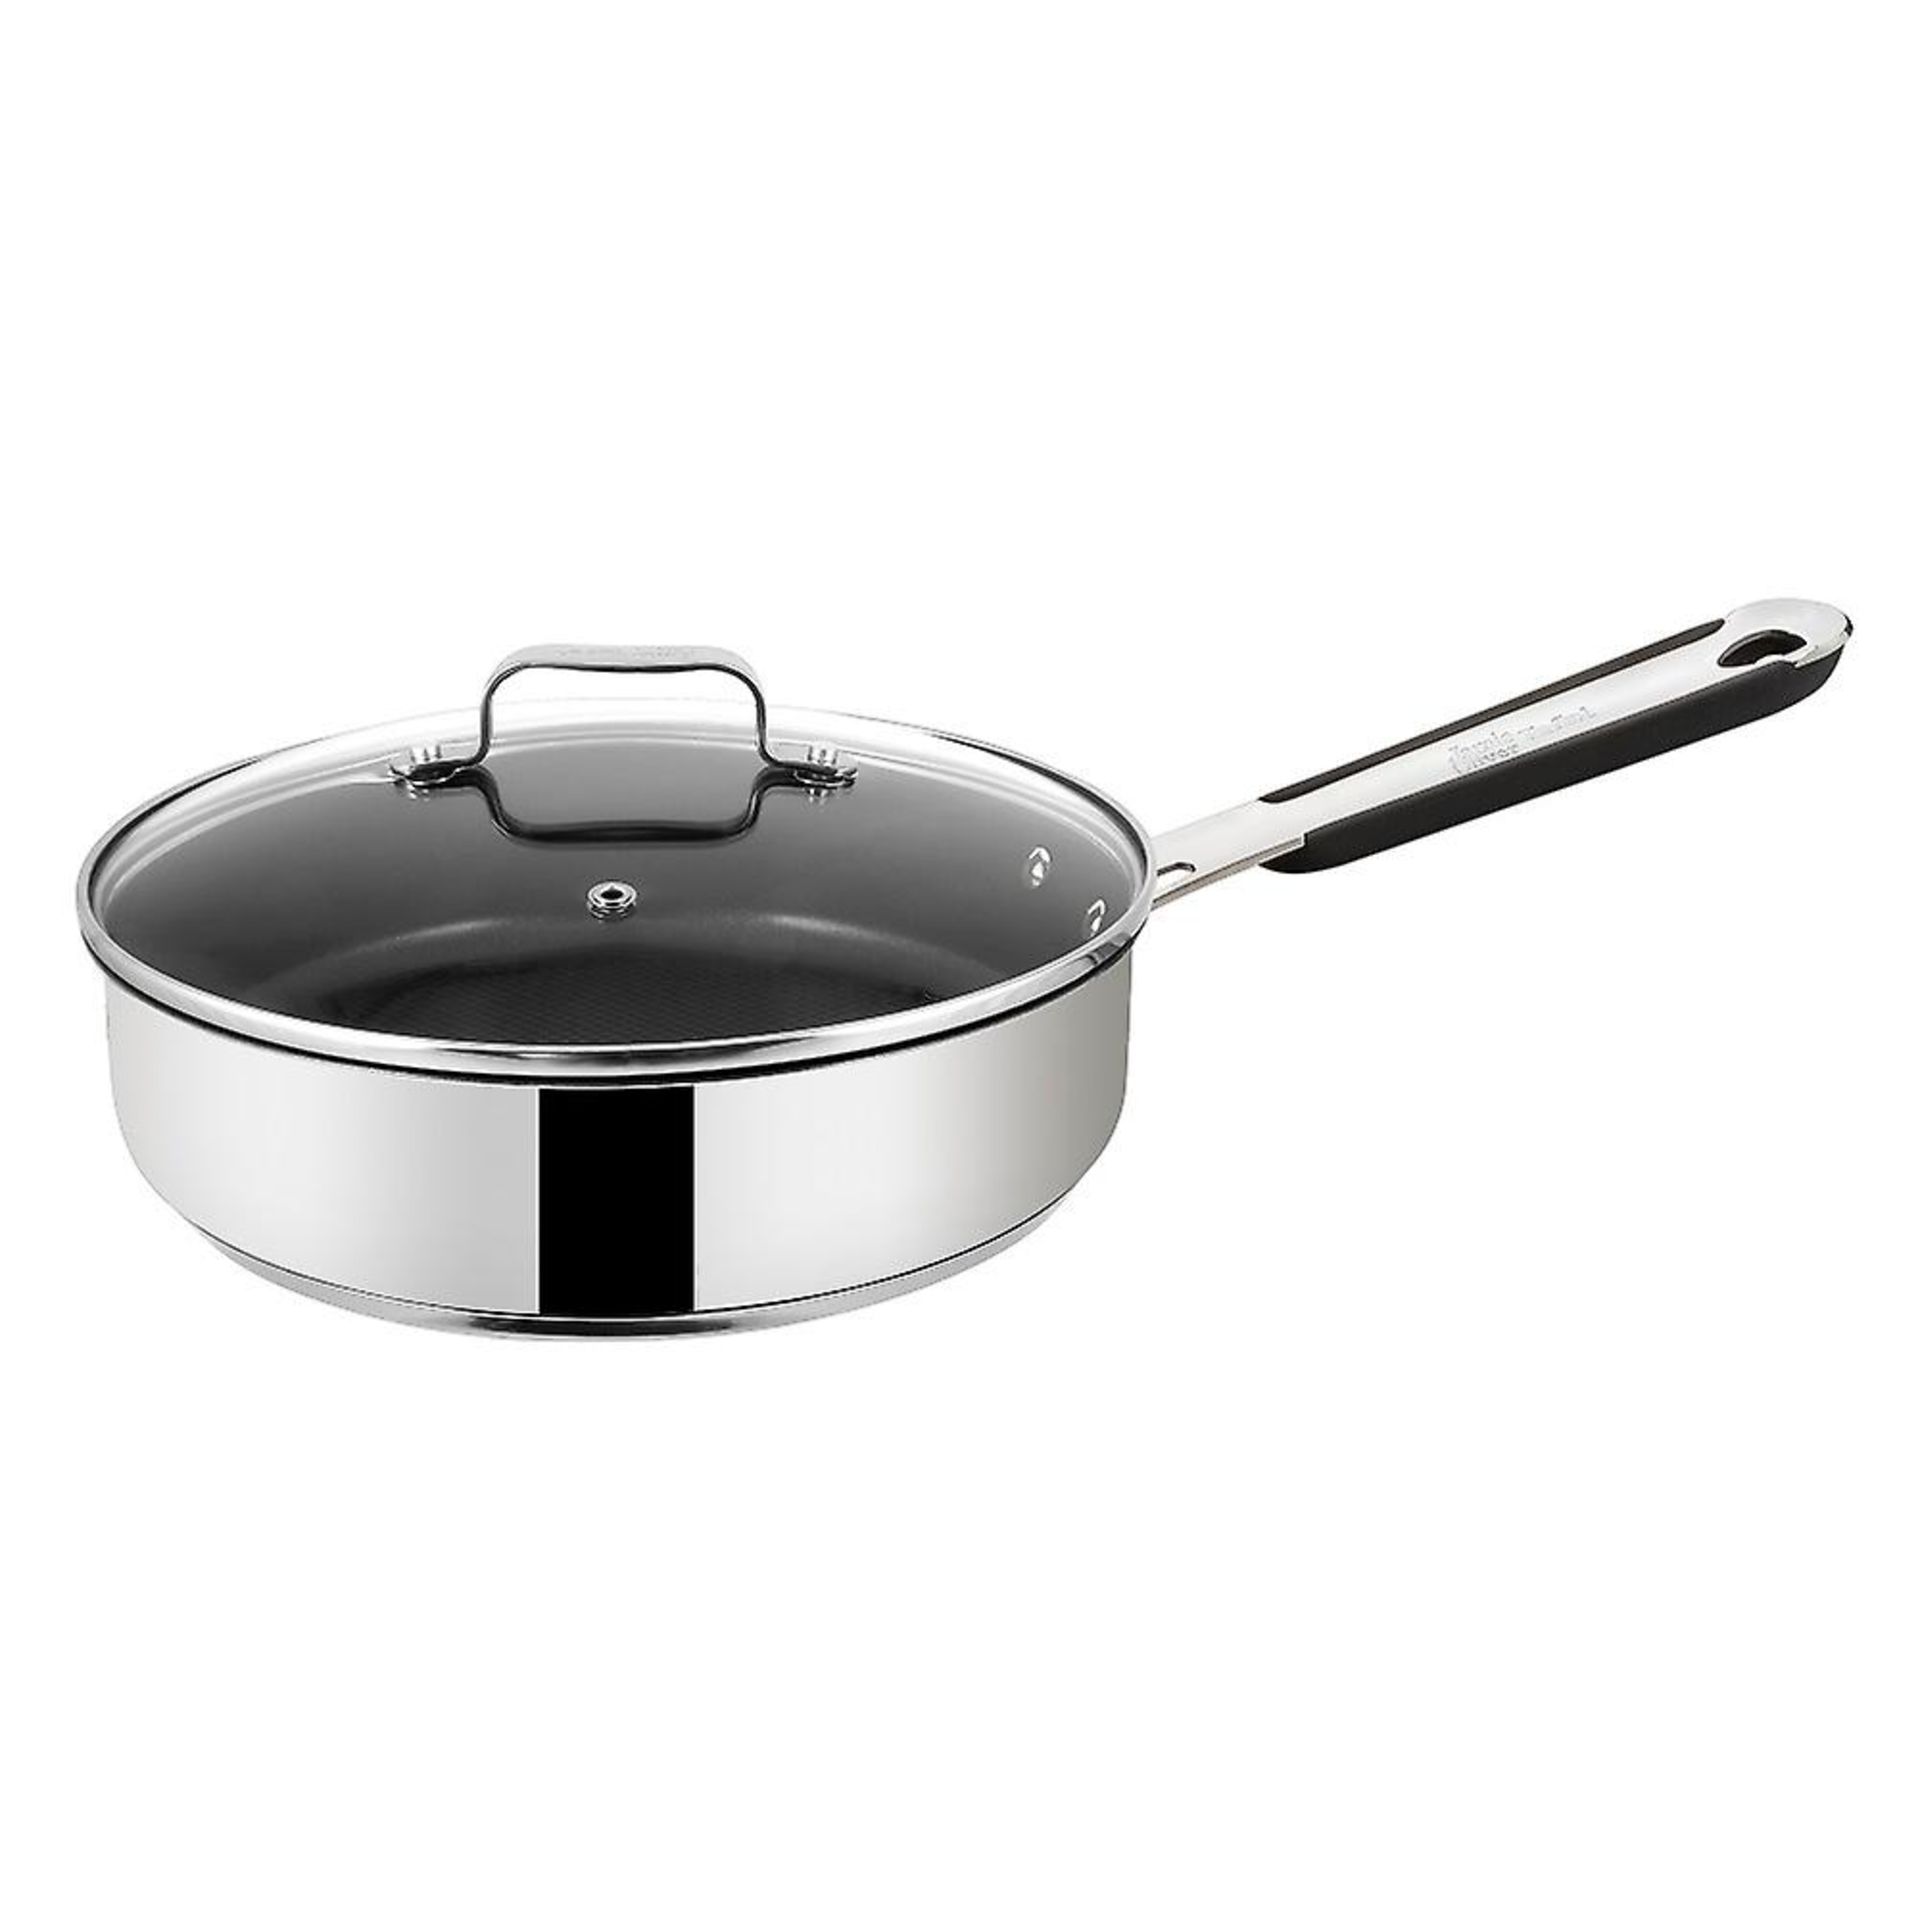 V Brand New Tefal Stainless Steel 25cm Saute Pan & Lid - 2.8L - Thermo Spot Technology - Ultra